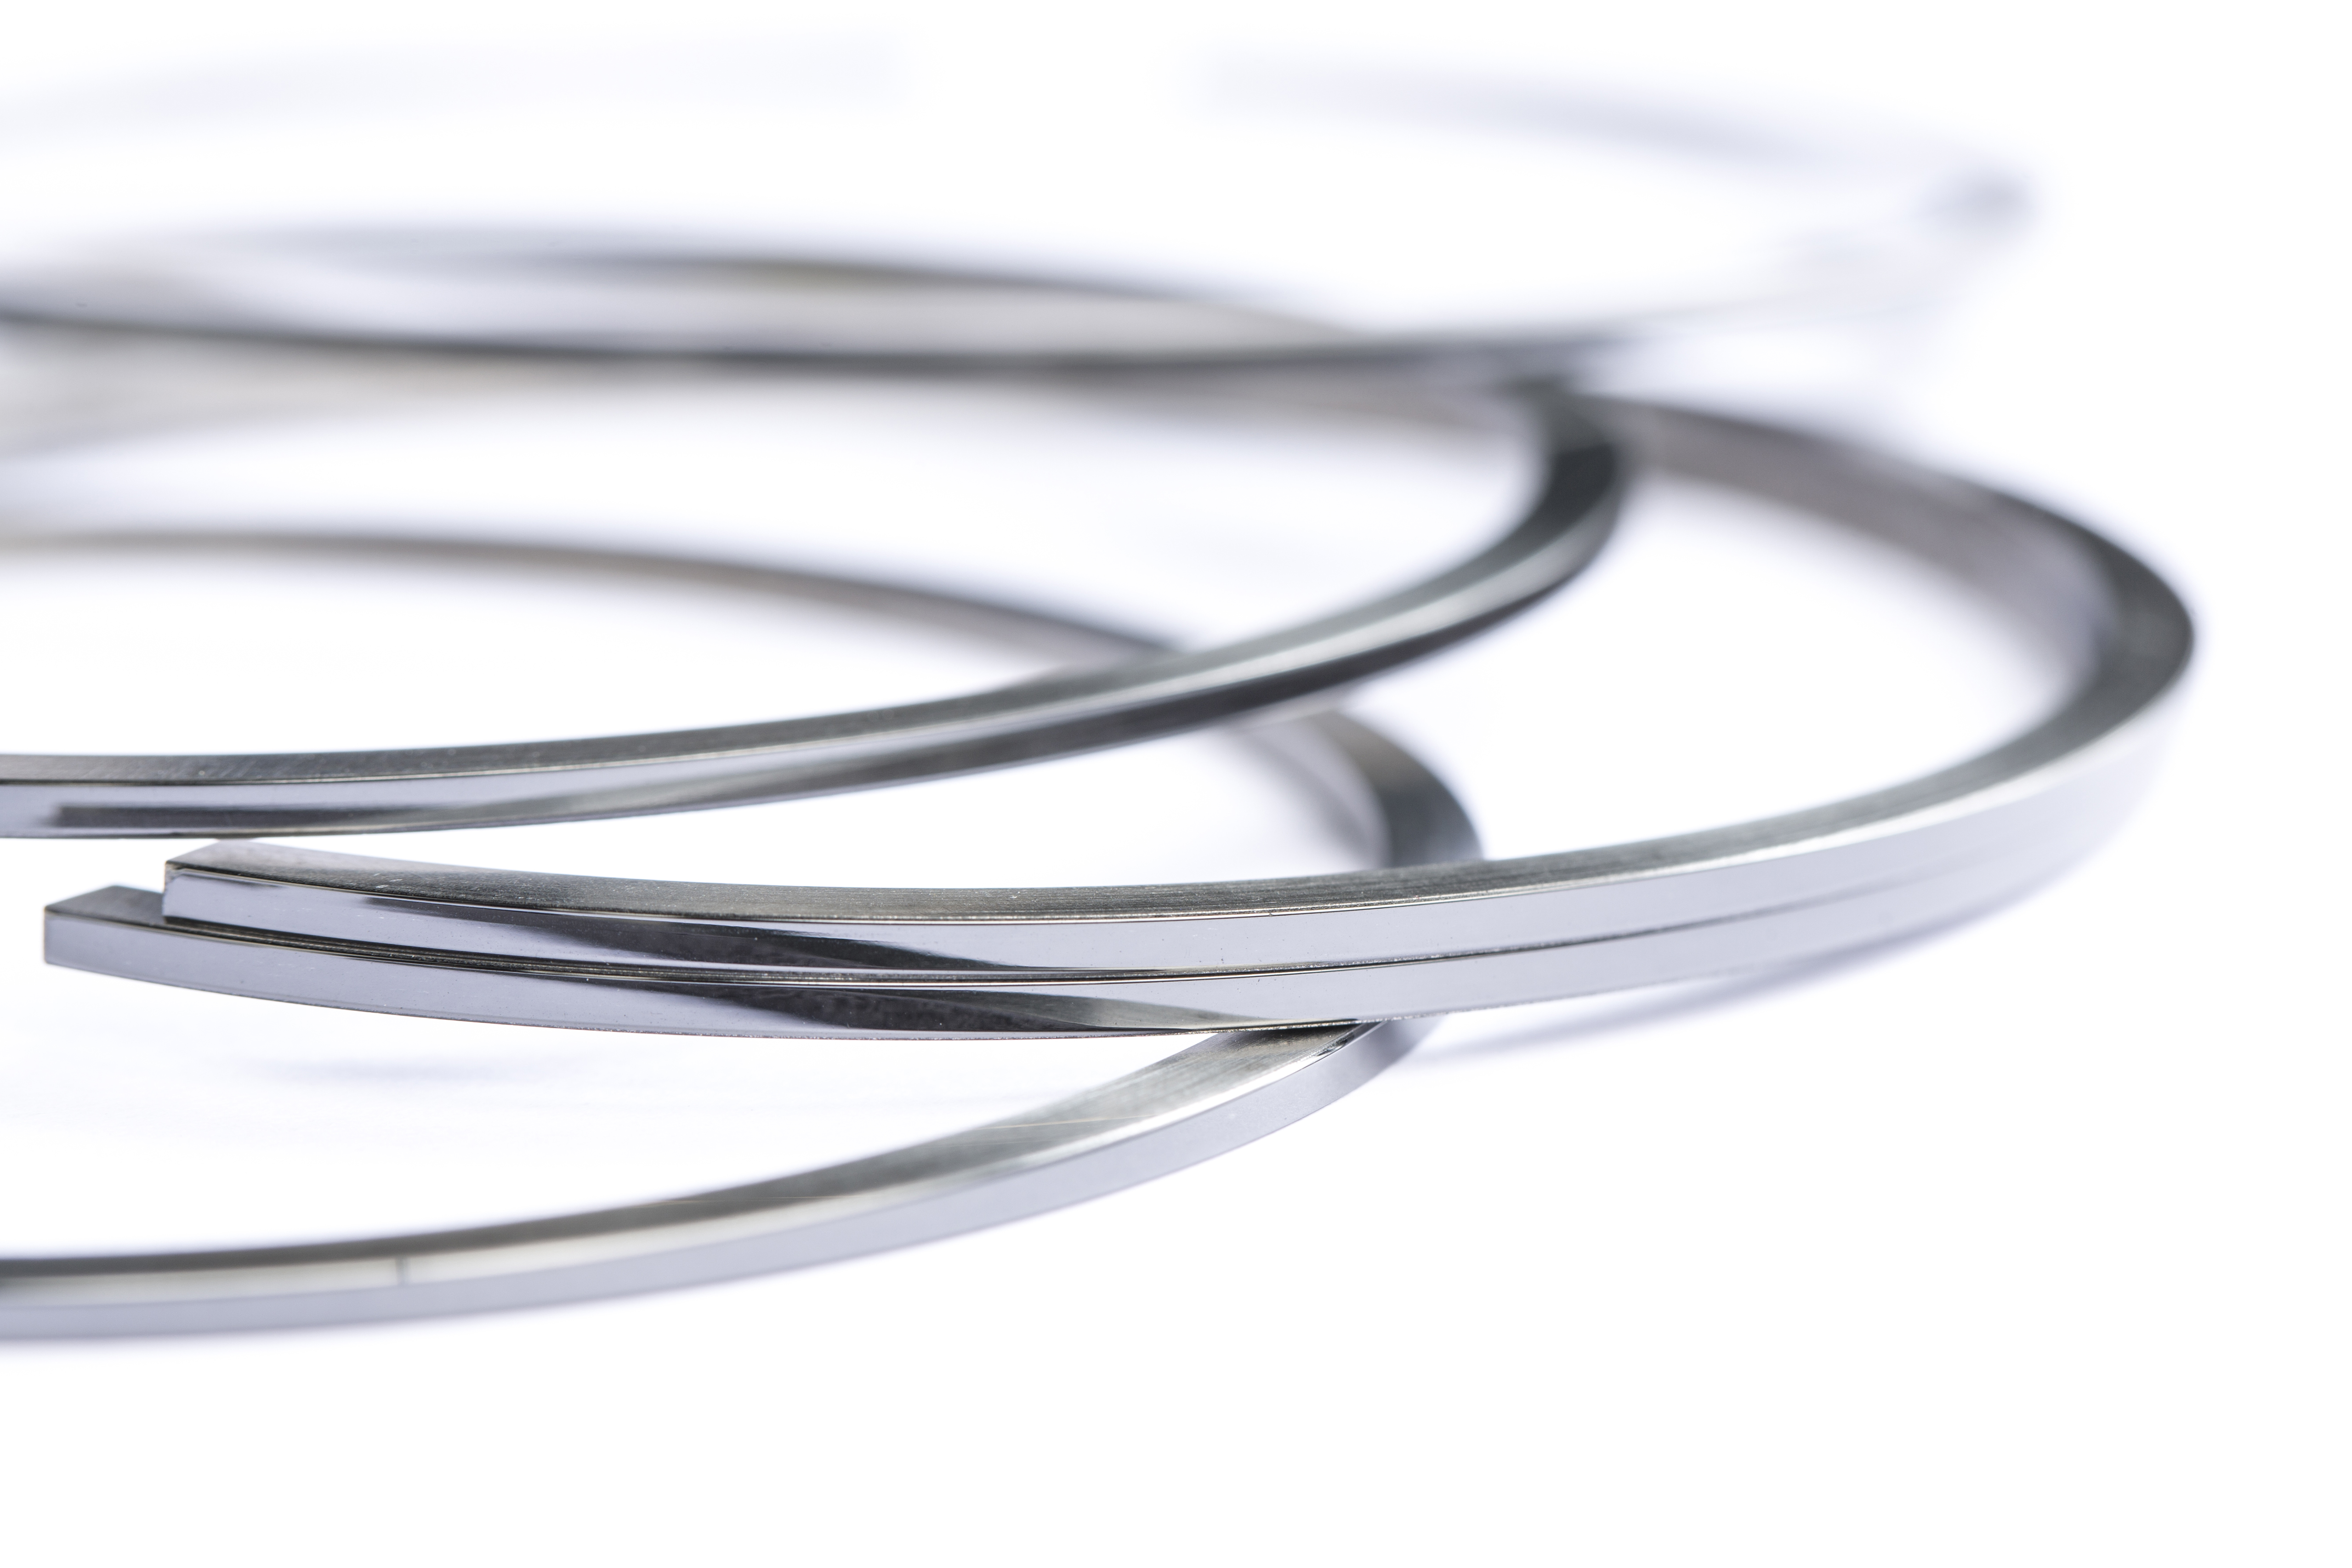 Piston rings coated with ta-C, which can reduce friction in engines by up to 50 percent.